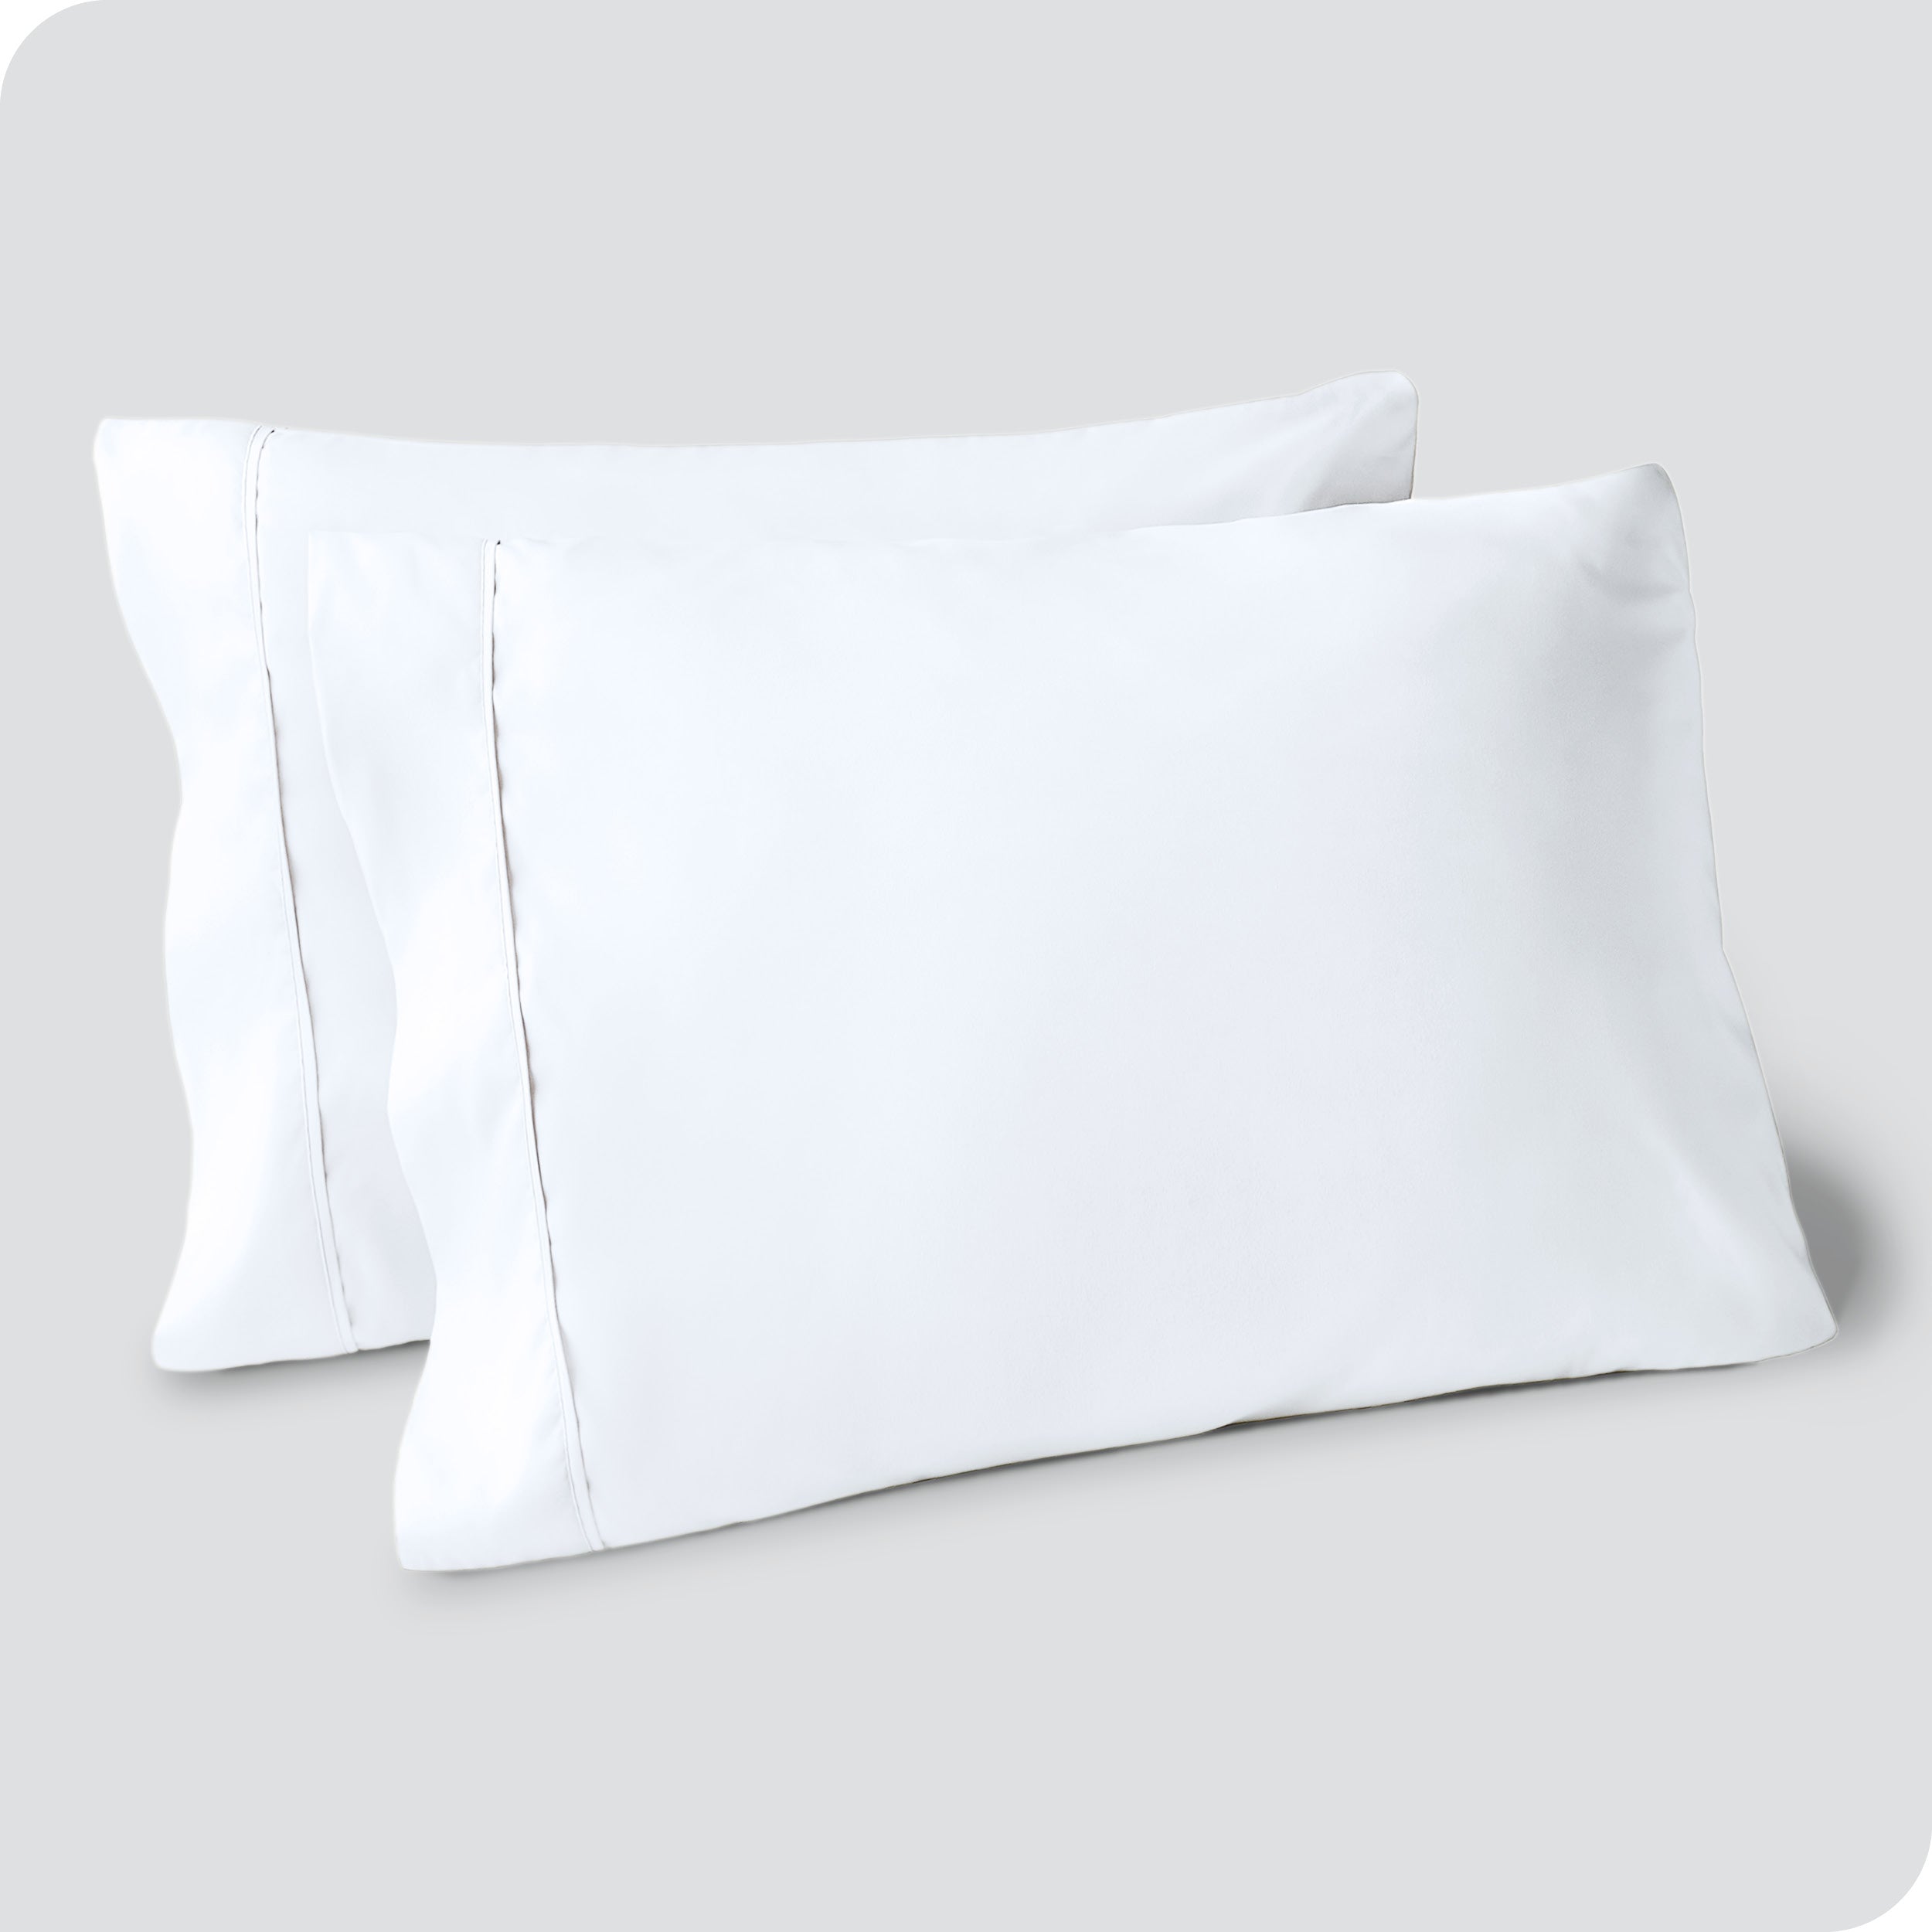 Two pillows on a white background with white pillowcases on them